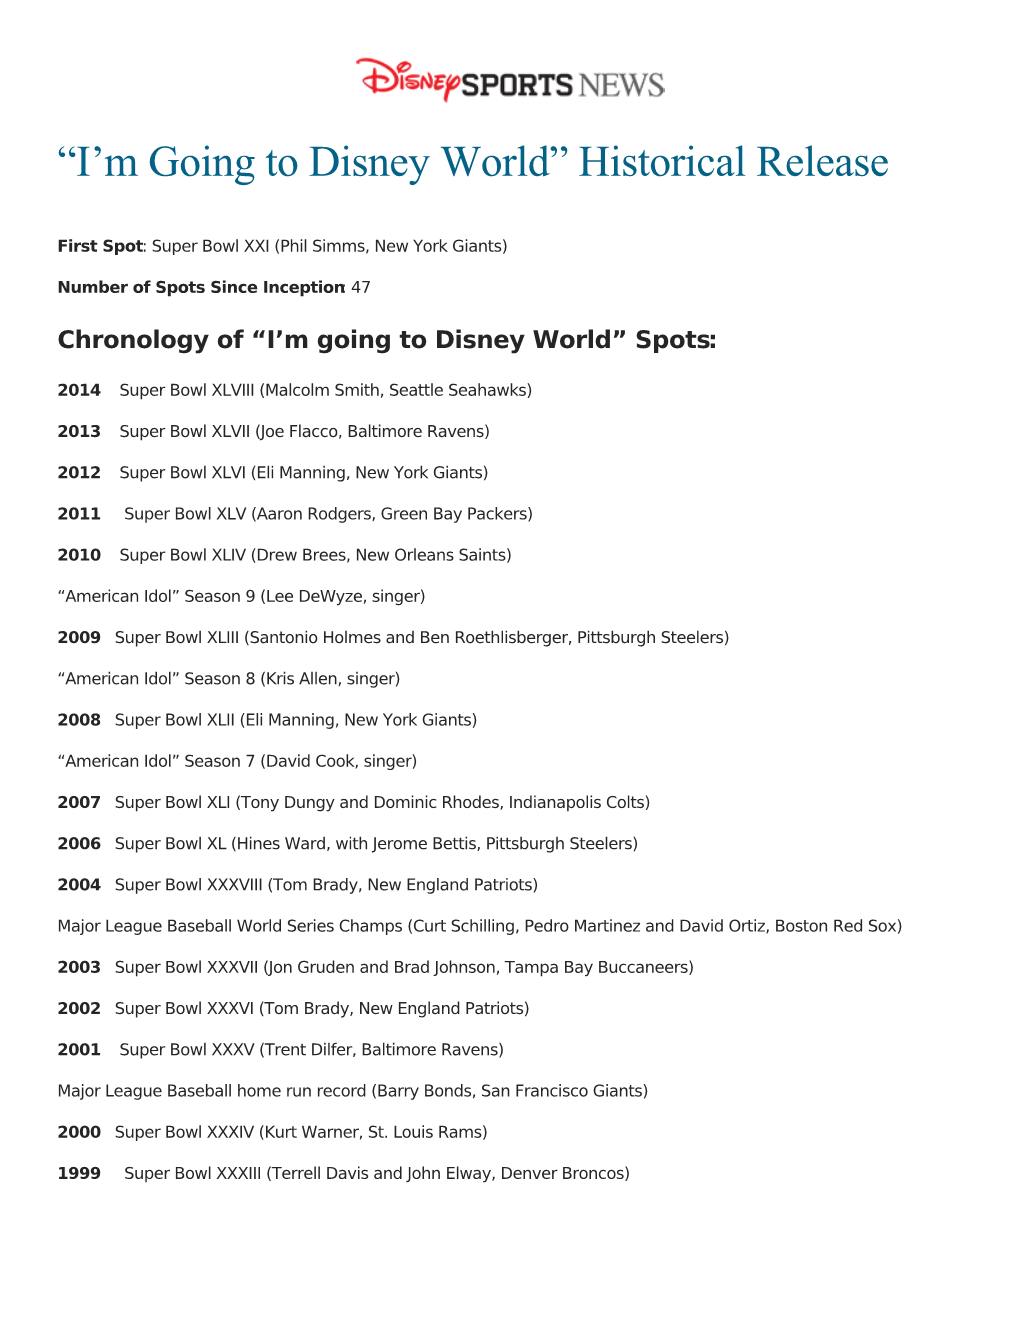 “I'm Going to Disney World” Historical Release